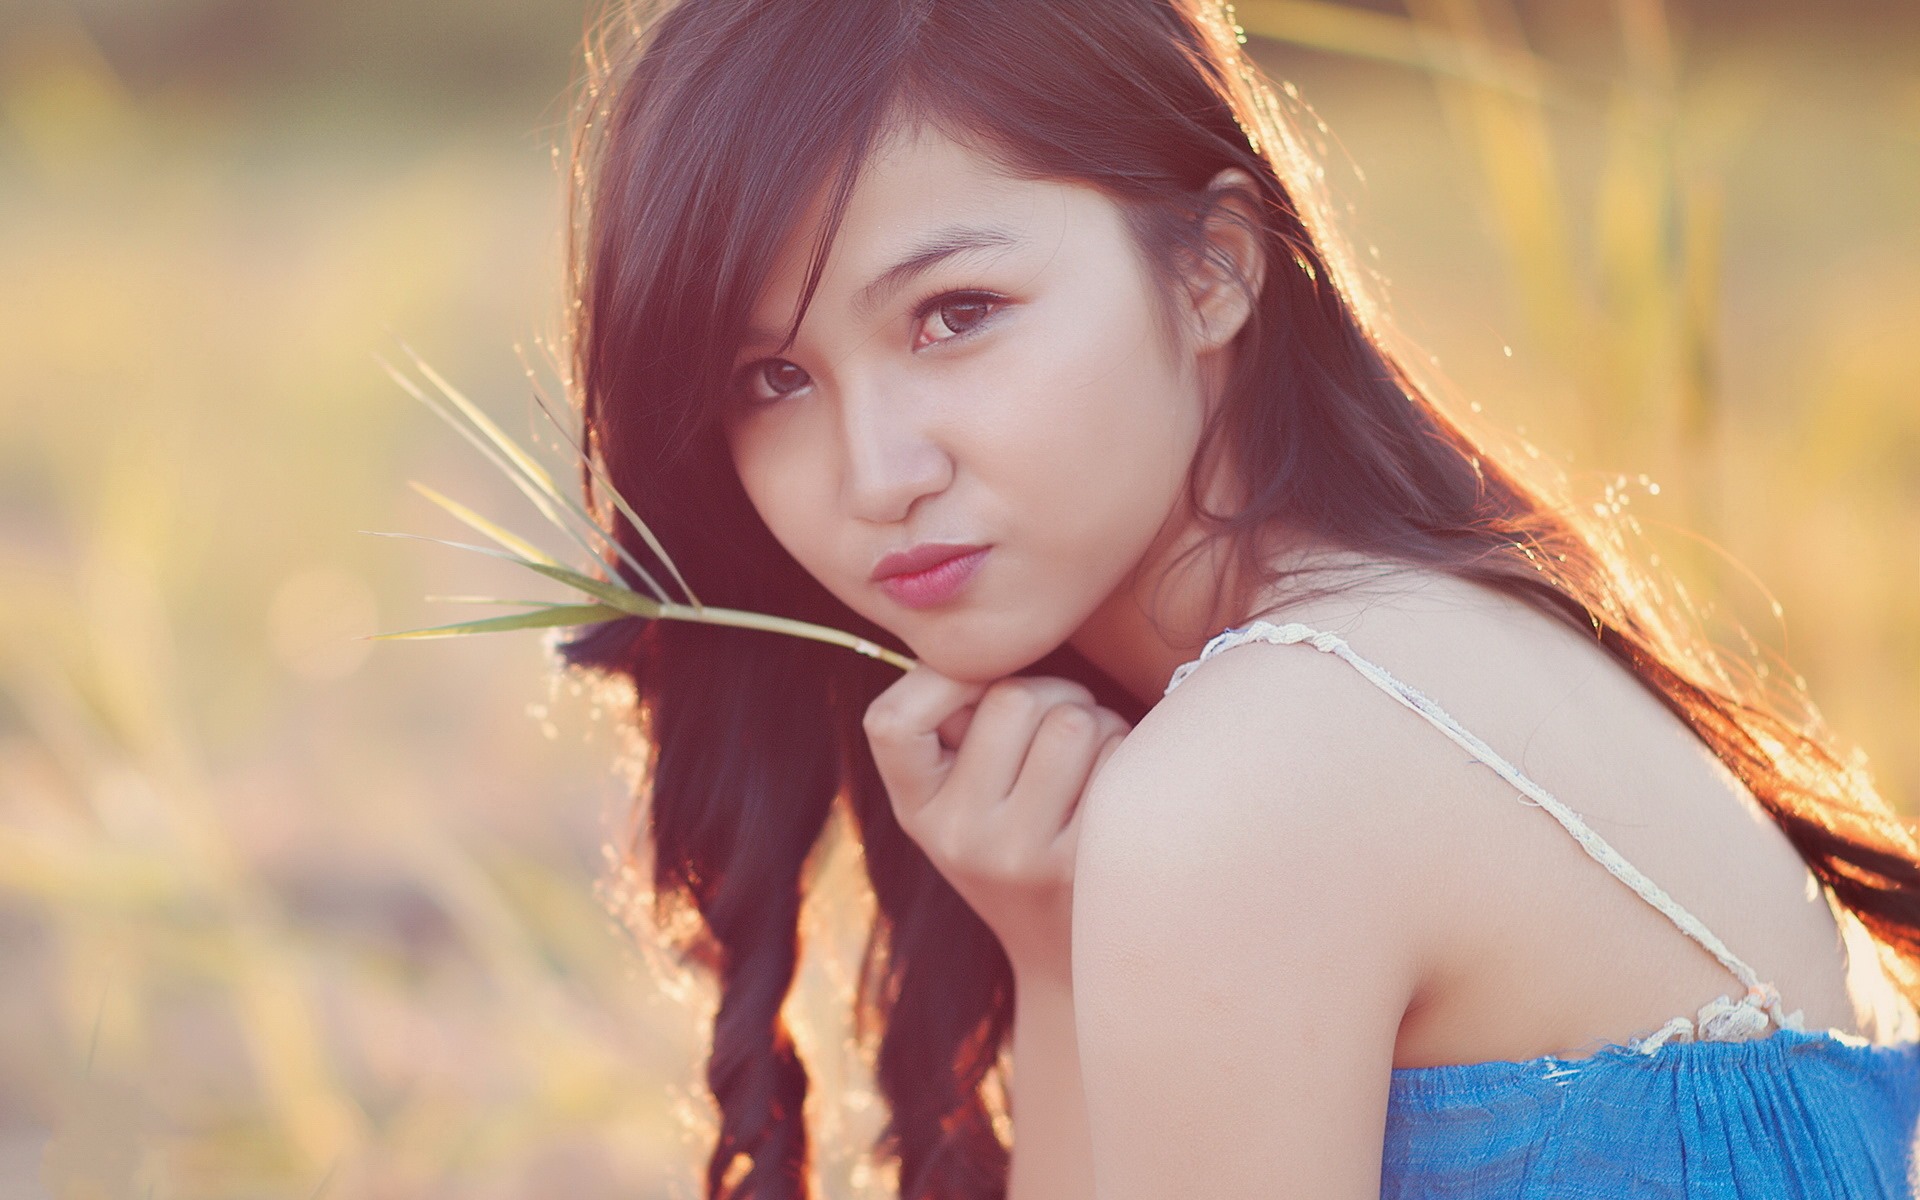 Pure and lovely young Asian girl HD wallpapers collection (5) #35 - 1920x1200